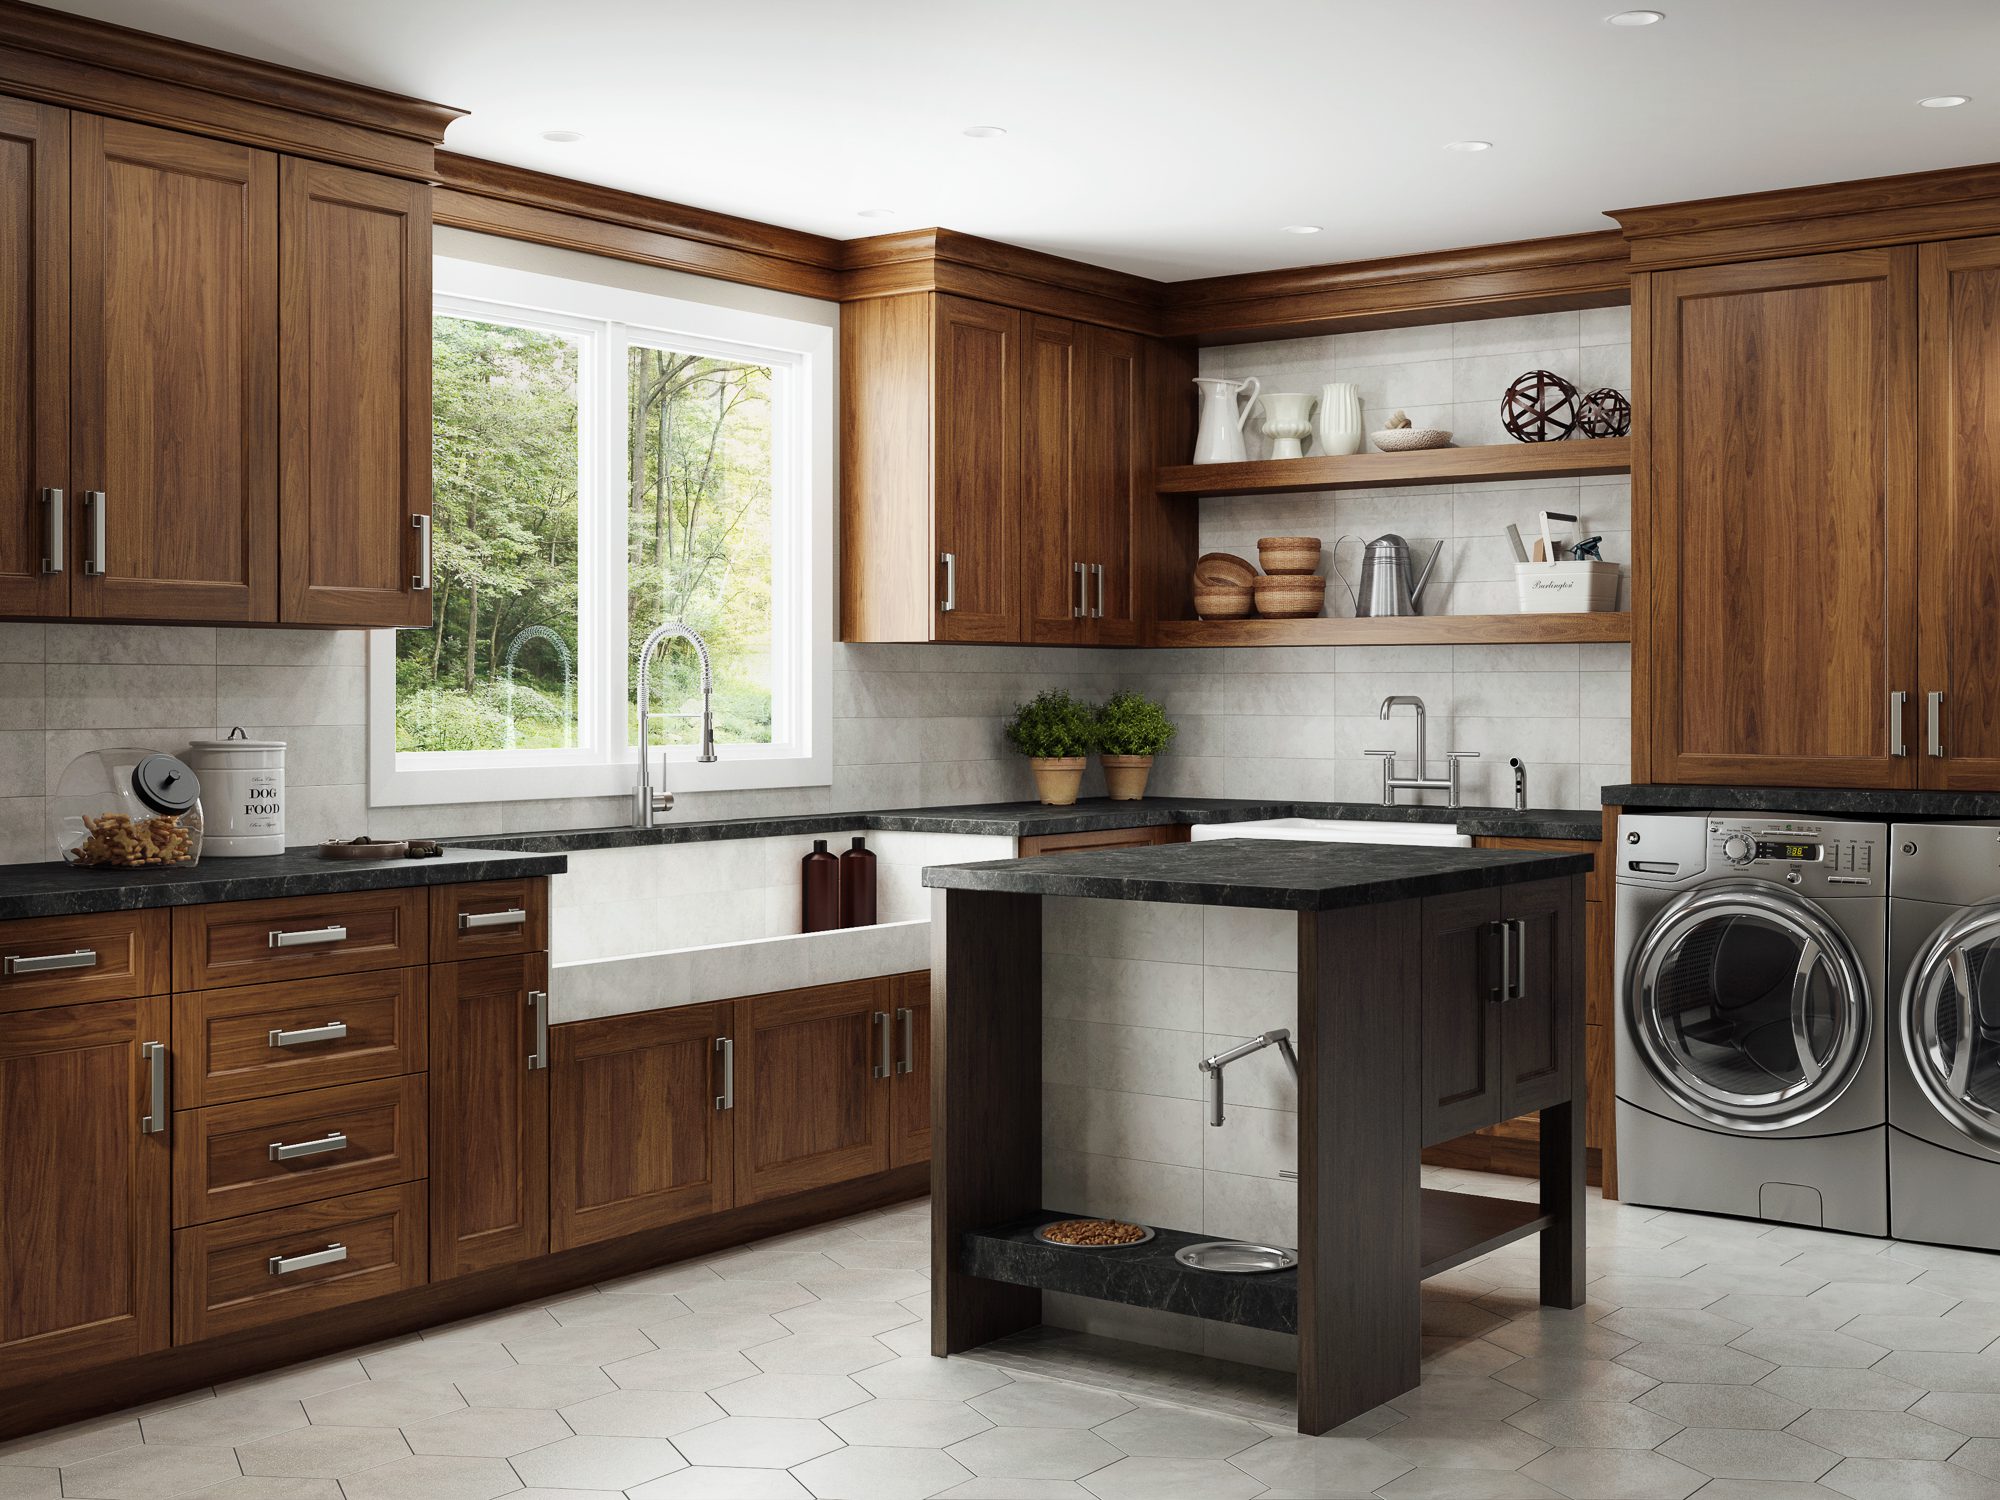 Featured image for “Premium Wholesale Cabinets: Your Go-To for Bridgewood’s Best”